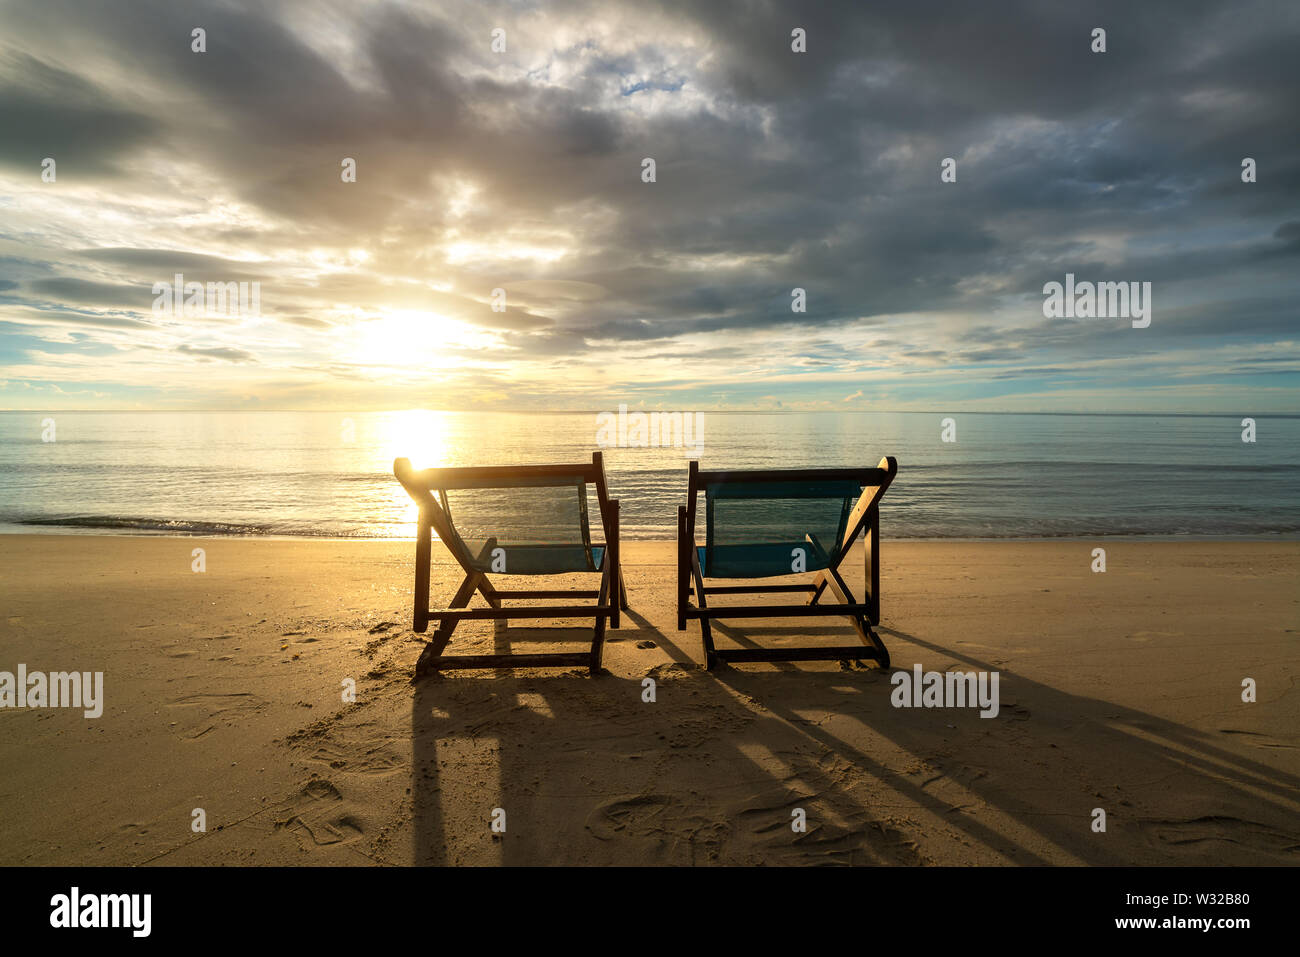 Two deckchairs on the beach at sunset with a tropical sea background. Travel and Vacation in Summer at sea. Stock Photo